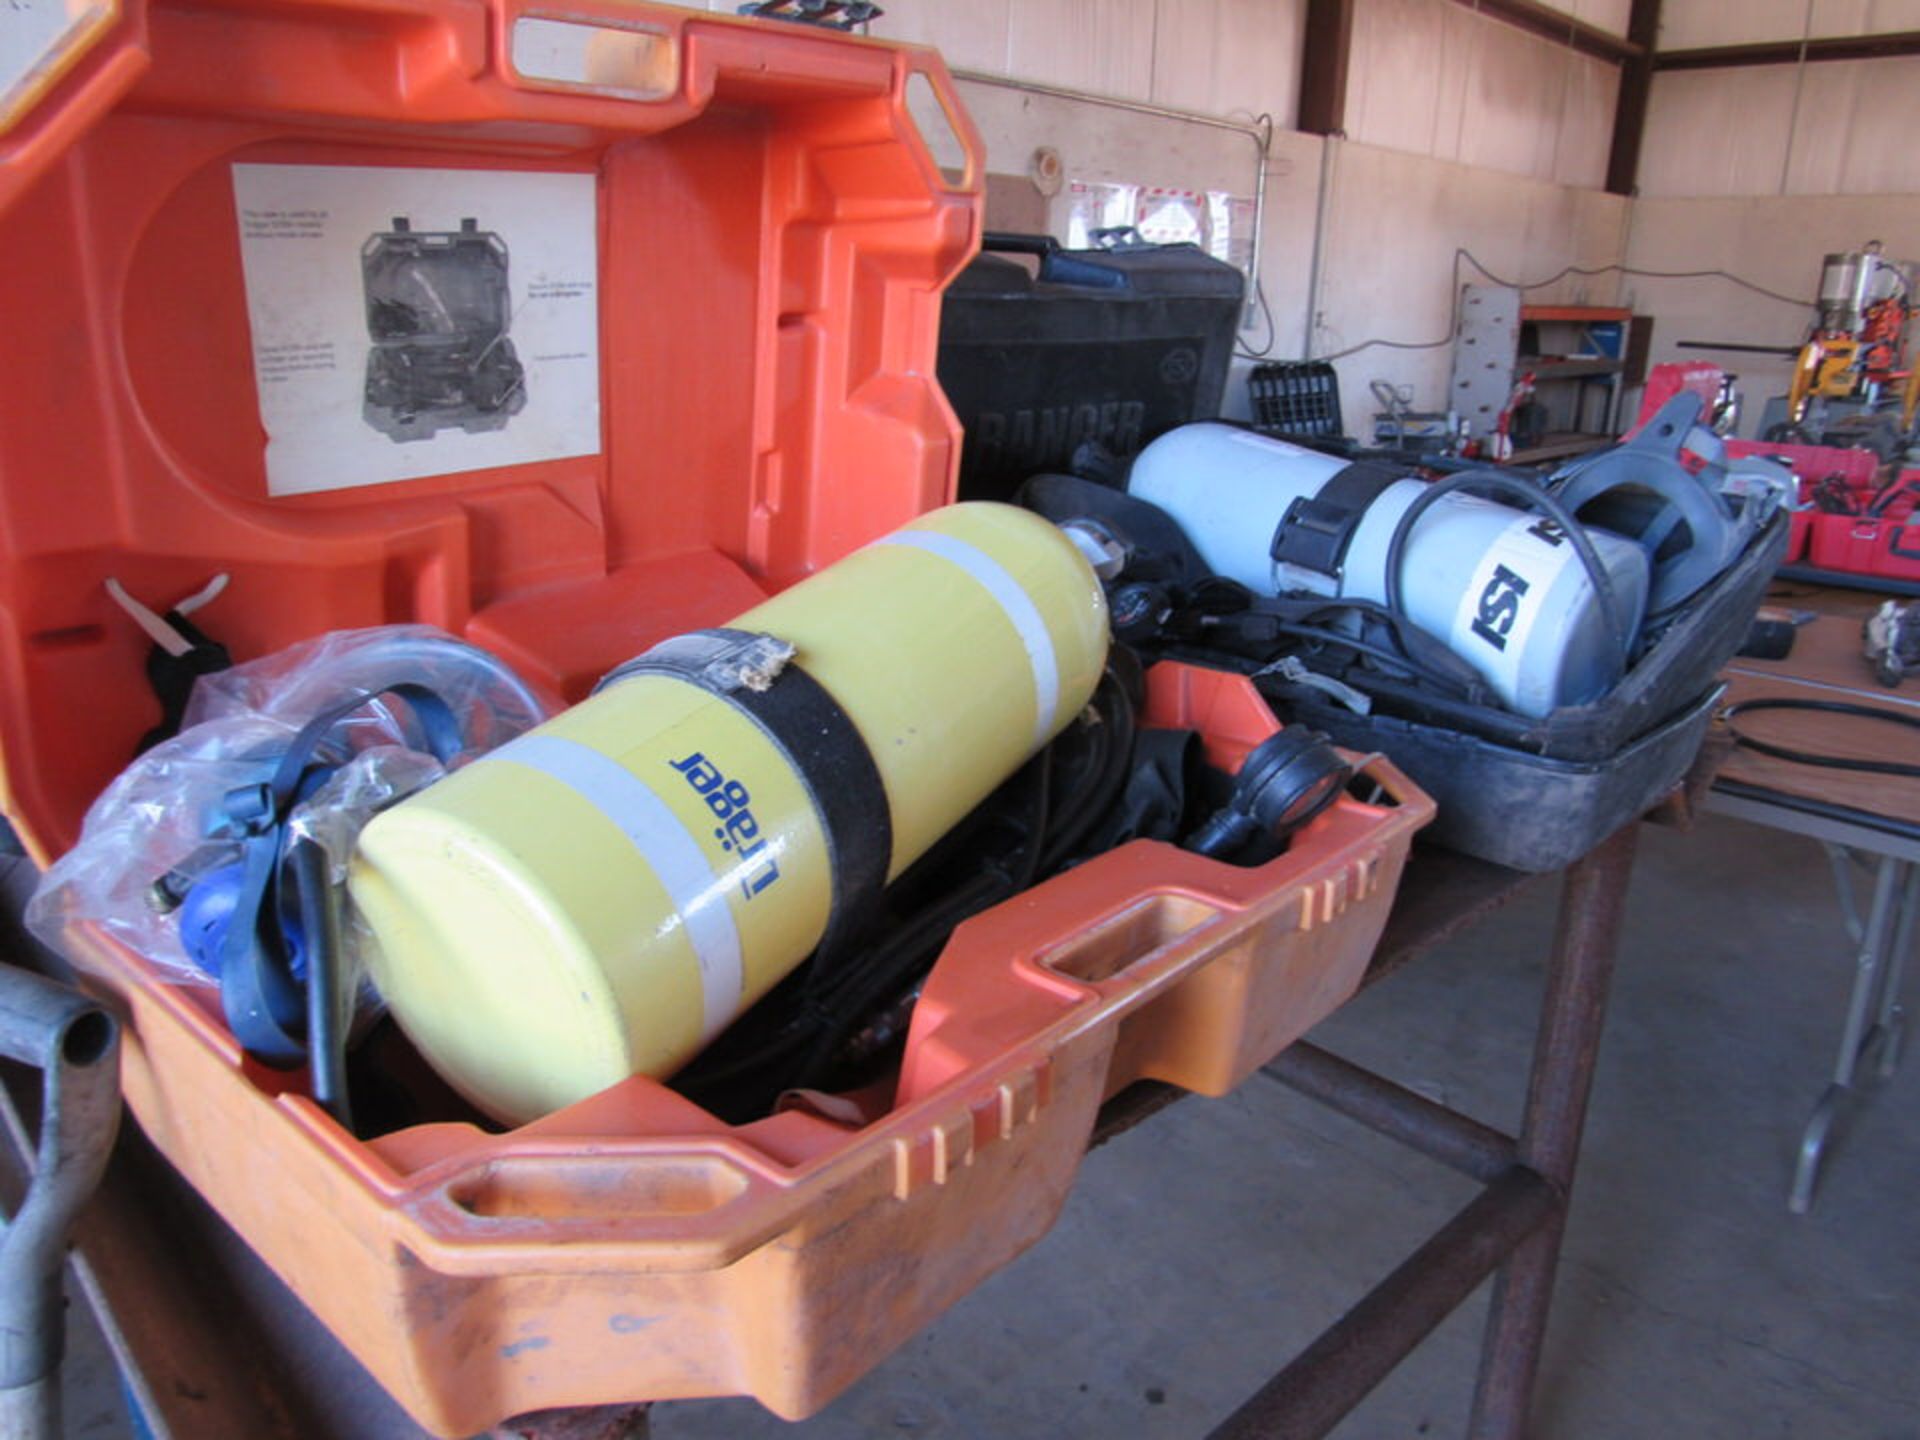 Two Air Tanks (Breathing Units) for Hazardous Operations, in Cases